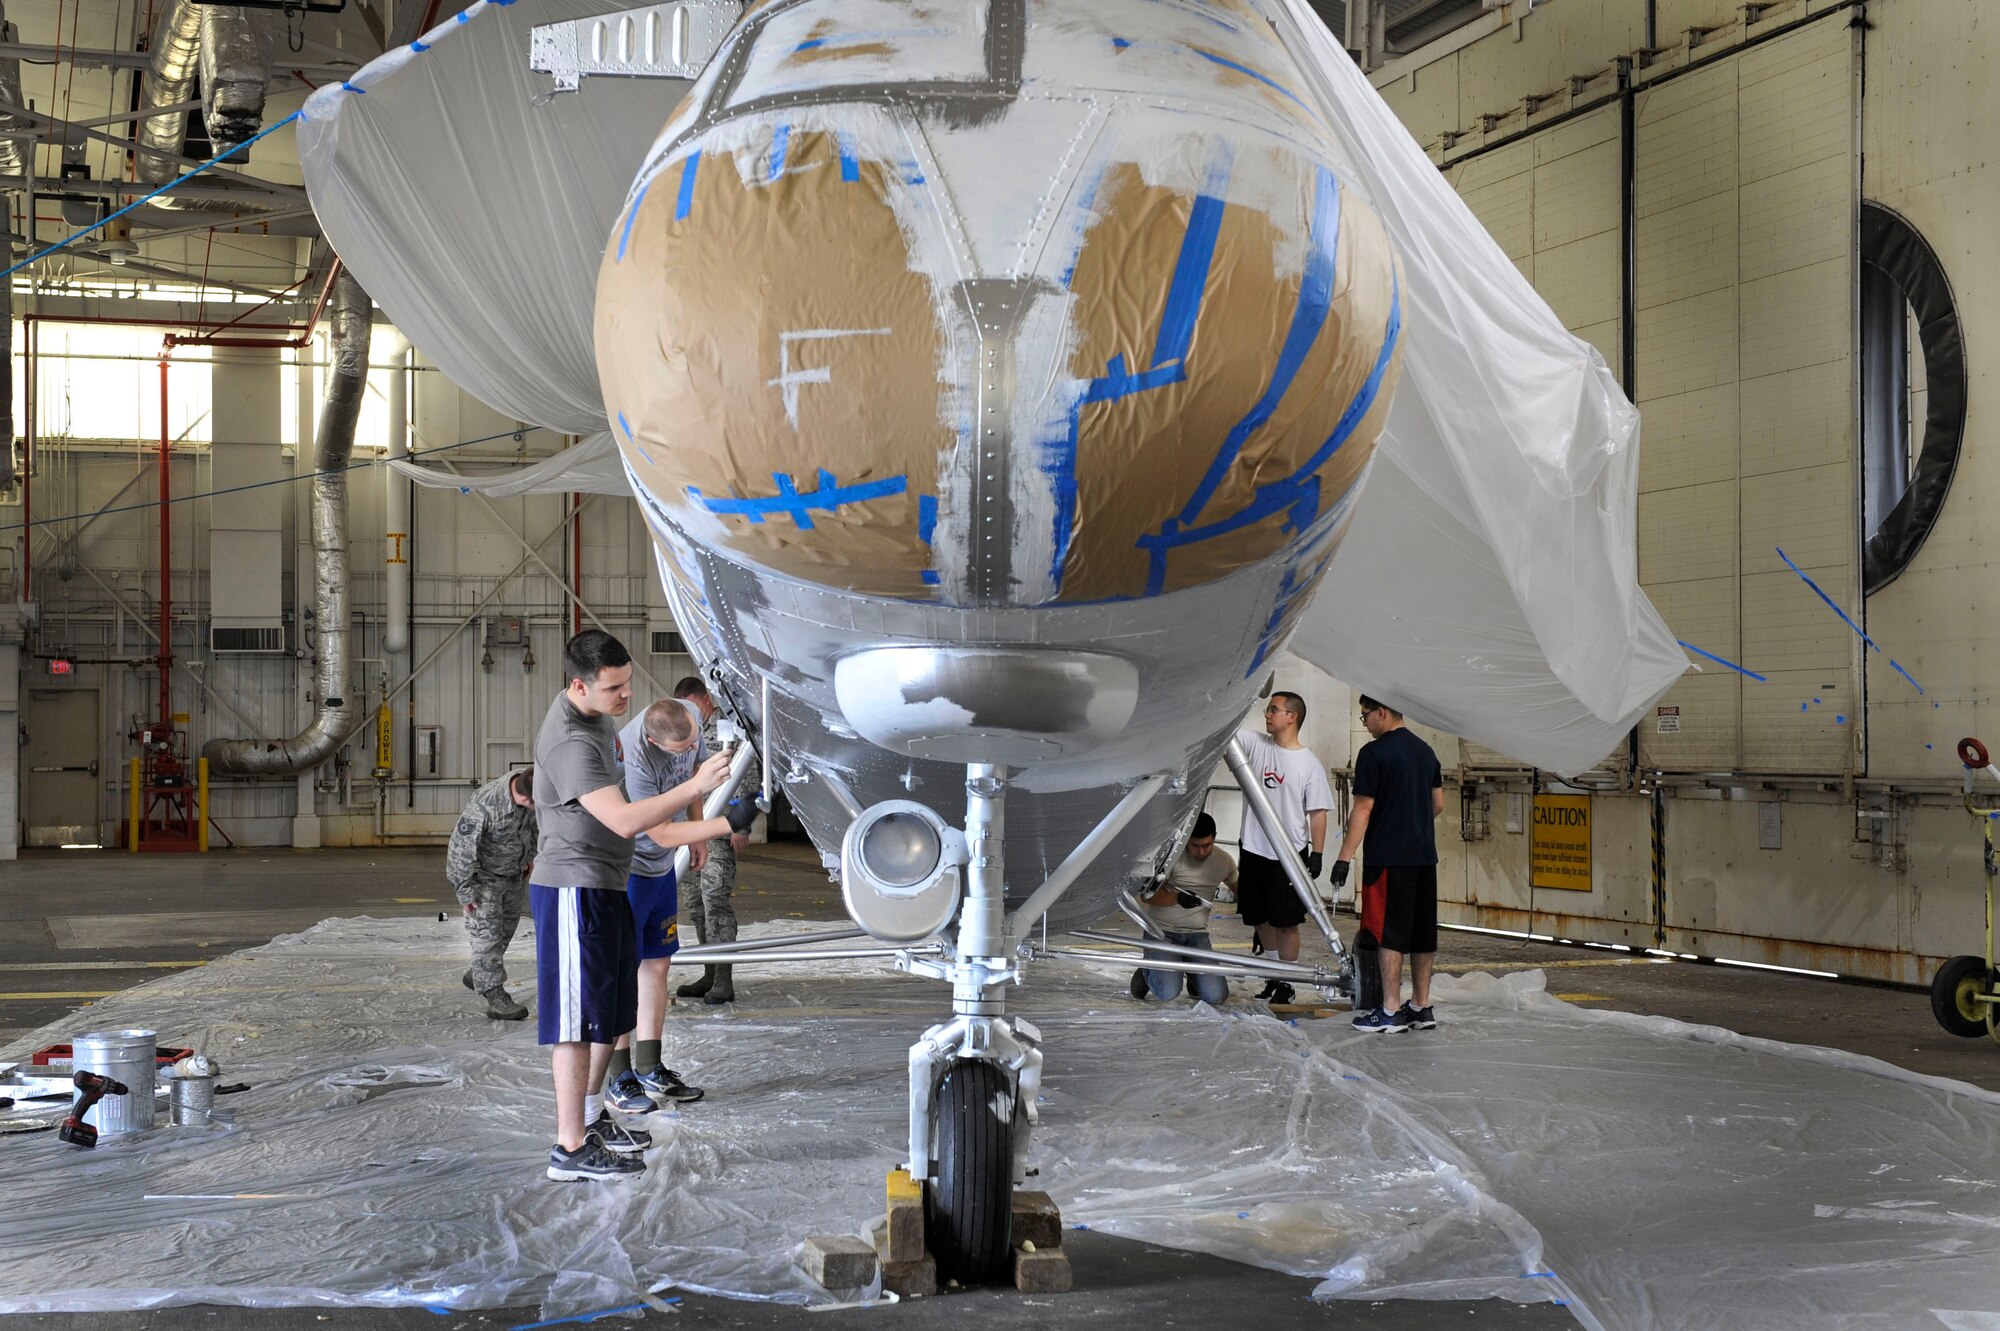 U.S. Air Force Airmen from the 314th Aircraft Maintenance Squadron paint a finishing coat on a Piasecki H-21 Workhorse helicopter May 12, 2015, at Little Rock Air Force Base, Ark. The 314th Airlift Wing received the helicopter from Kirtland Air Force Base and plan to display it in Heritage Park toward the end of June. (U.S. Air Force photo by Senior Airman Stephanie Serrano)